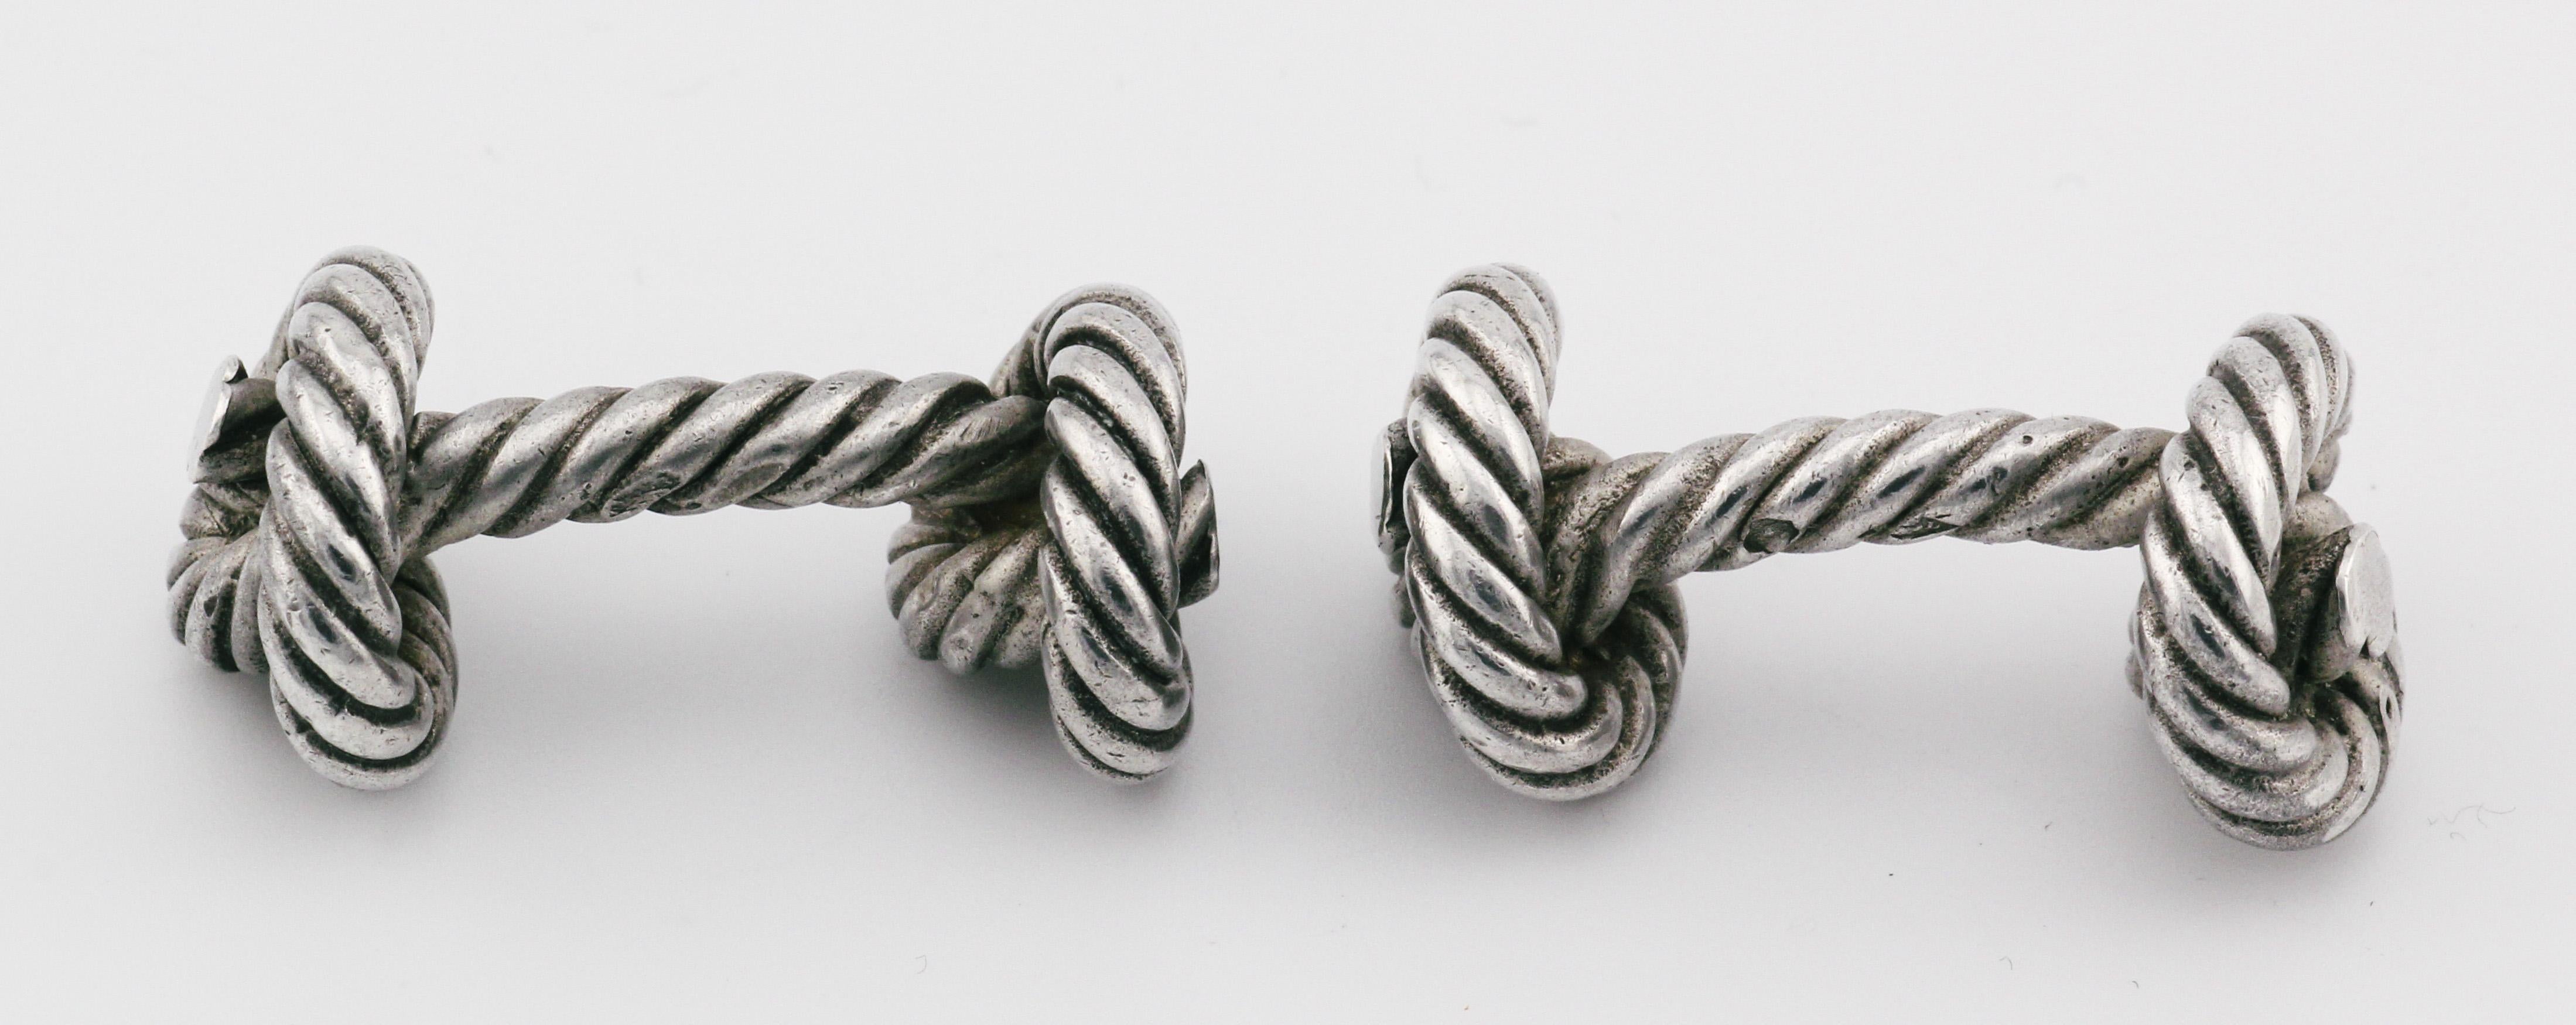 Hermes Vintage Sterling Silver Knot Cufflinks In Good Condition For Sale In Bellmore, NY